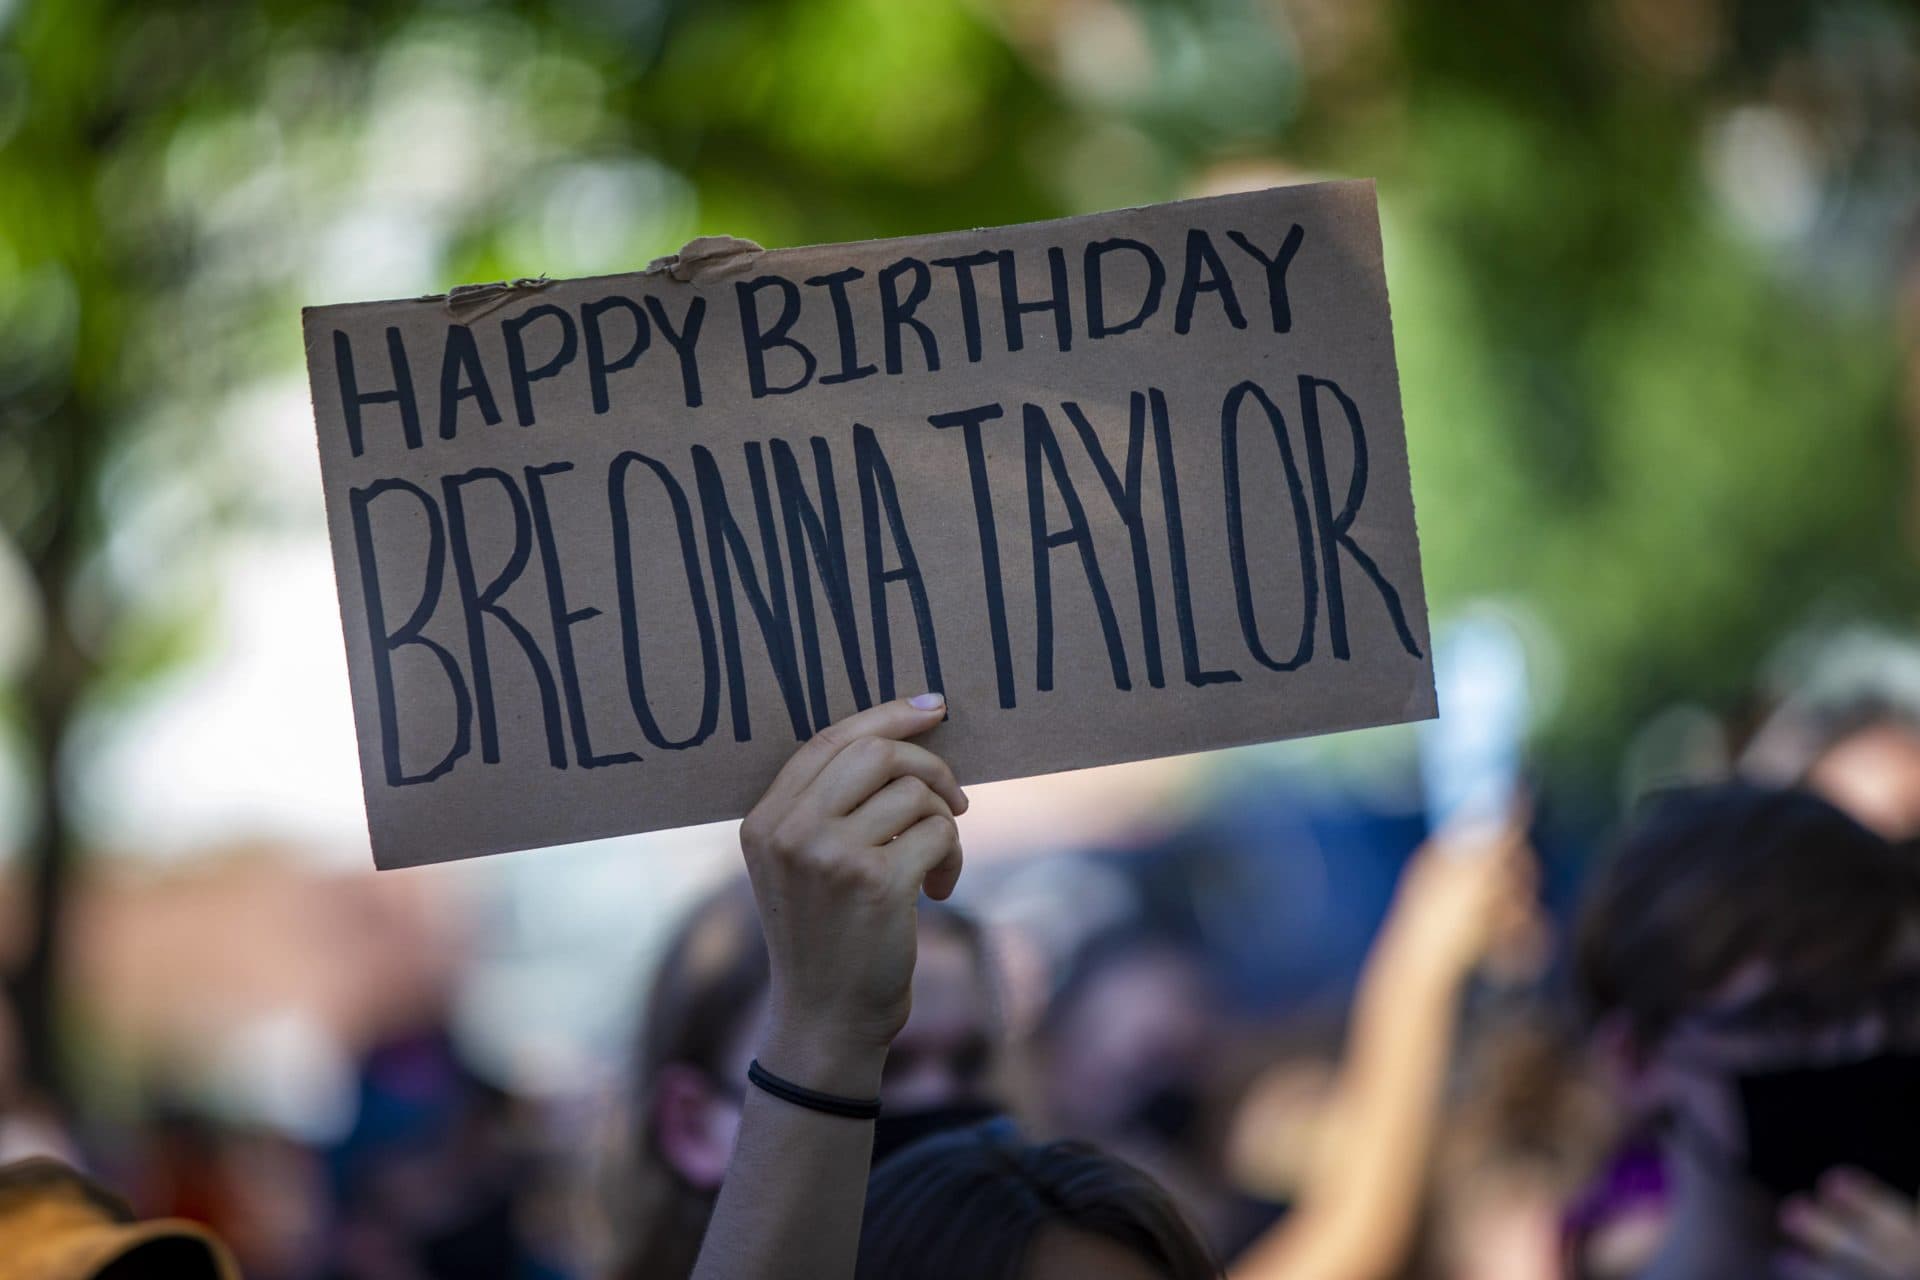 A sign at a vigil in Boston marking the birthday of Breonna Taylor. (Jesse Costa/WBUR)